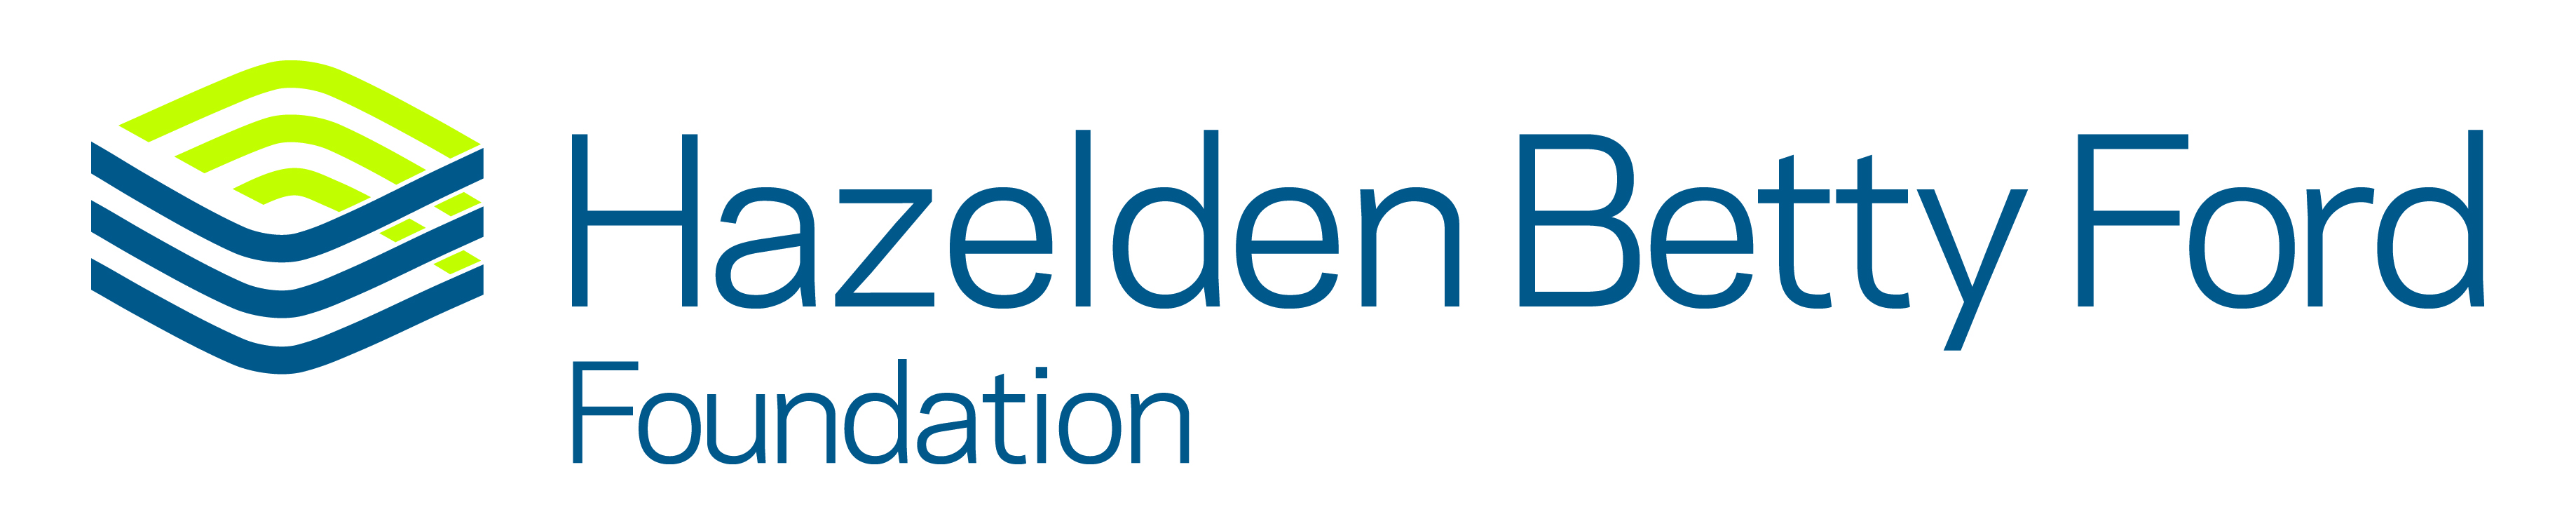 Hazelden Betty Ford Foundation Accredited National Association of